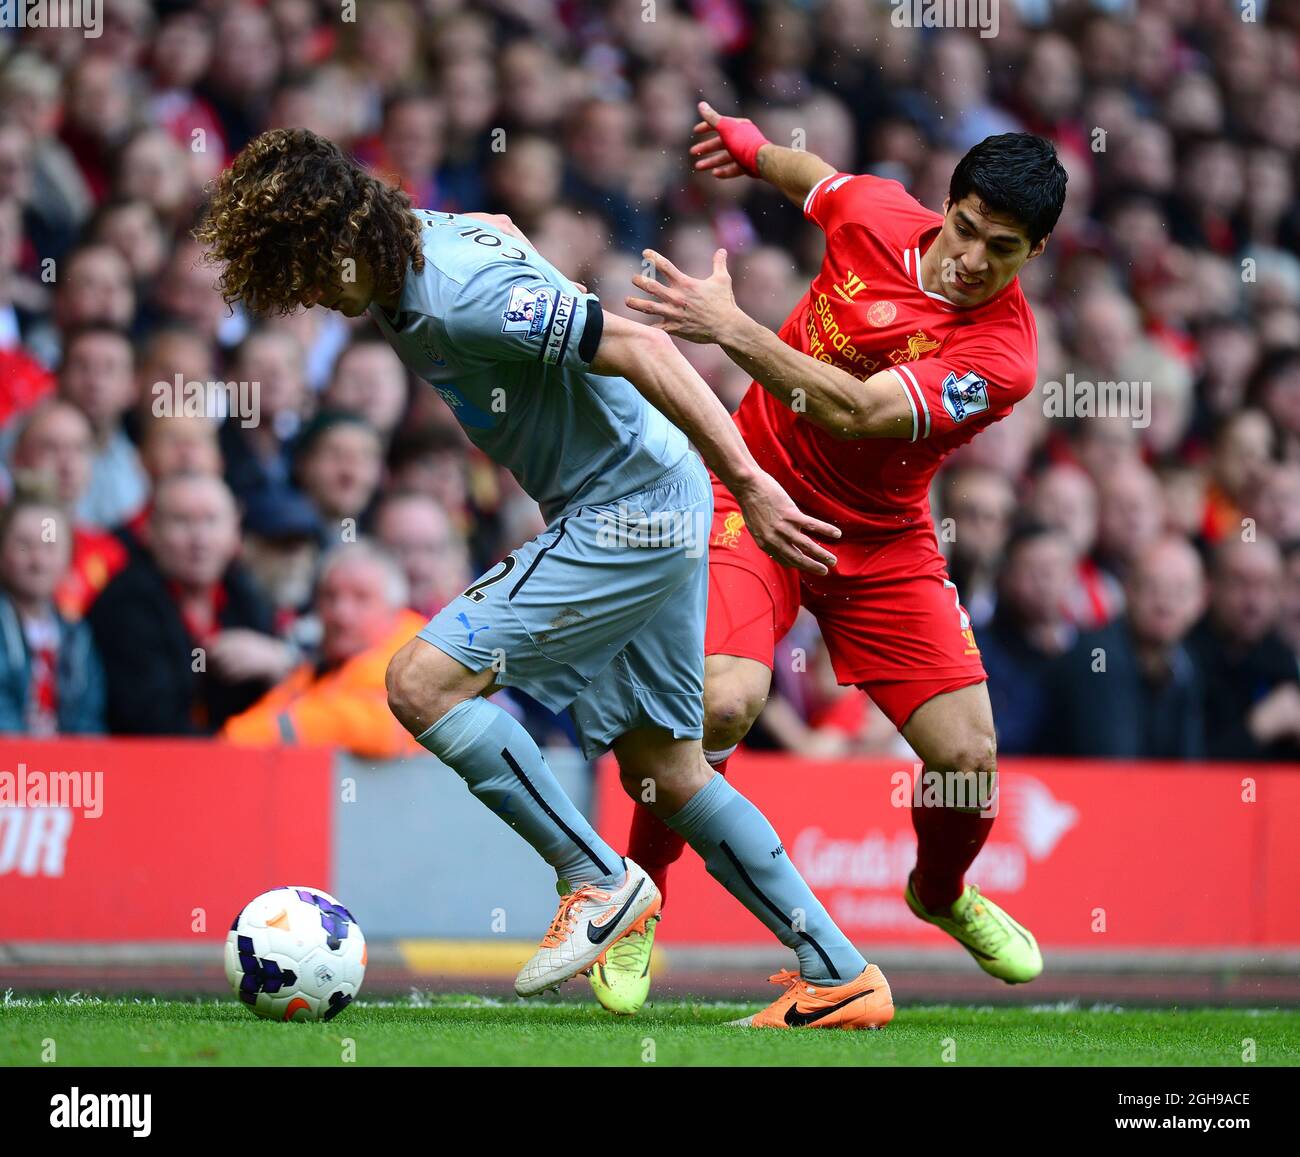 Fabricio Coloccini of Newcastle United tussles with Luis Suarez of Liverpool during Barclays Premier League match between Liverpool and Newcastle United at Anfield in Liverpool, United Kingdom on May 11, 2014. Pic Simon Bellis. Stock Photo